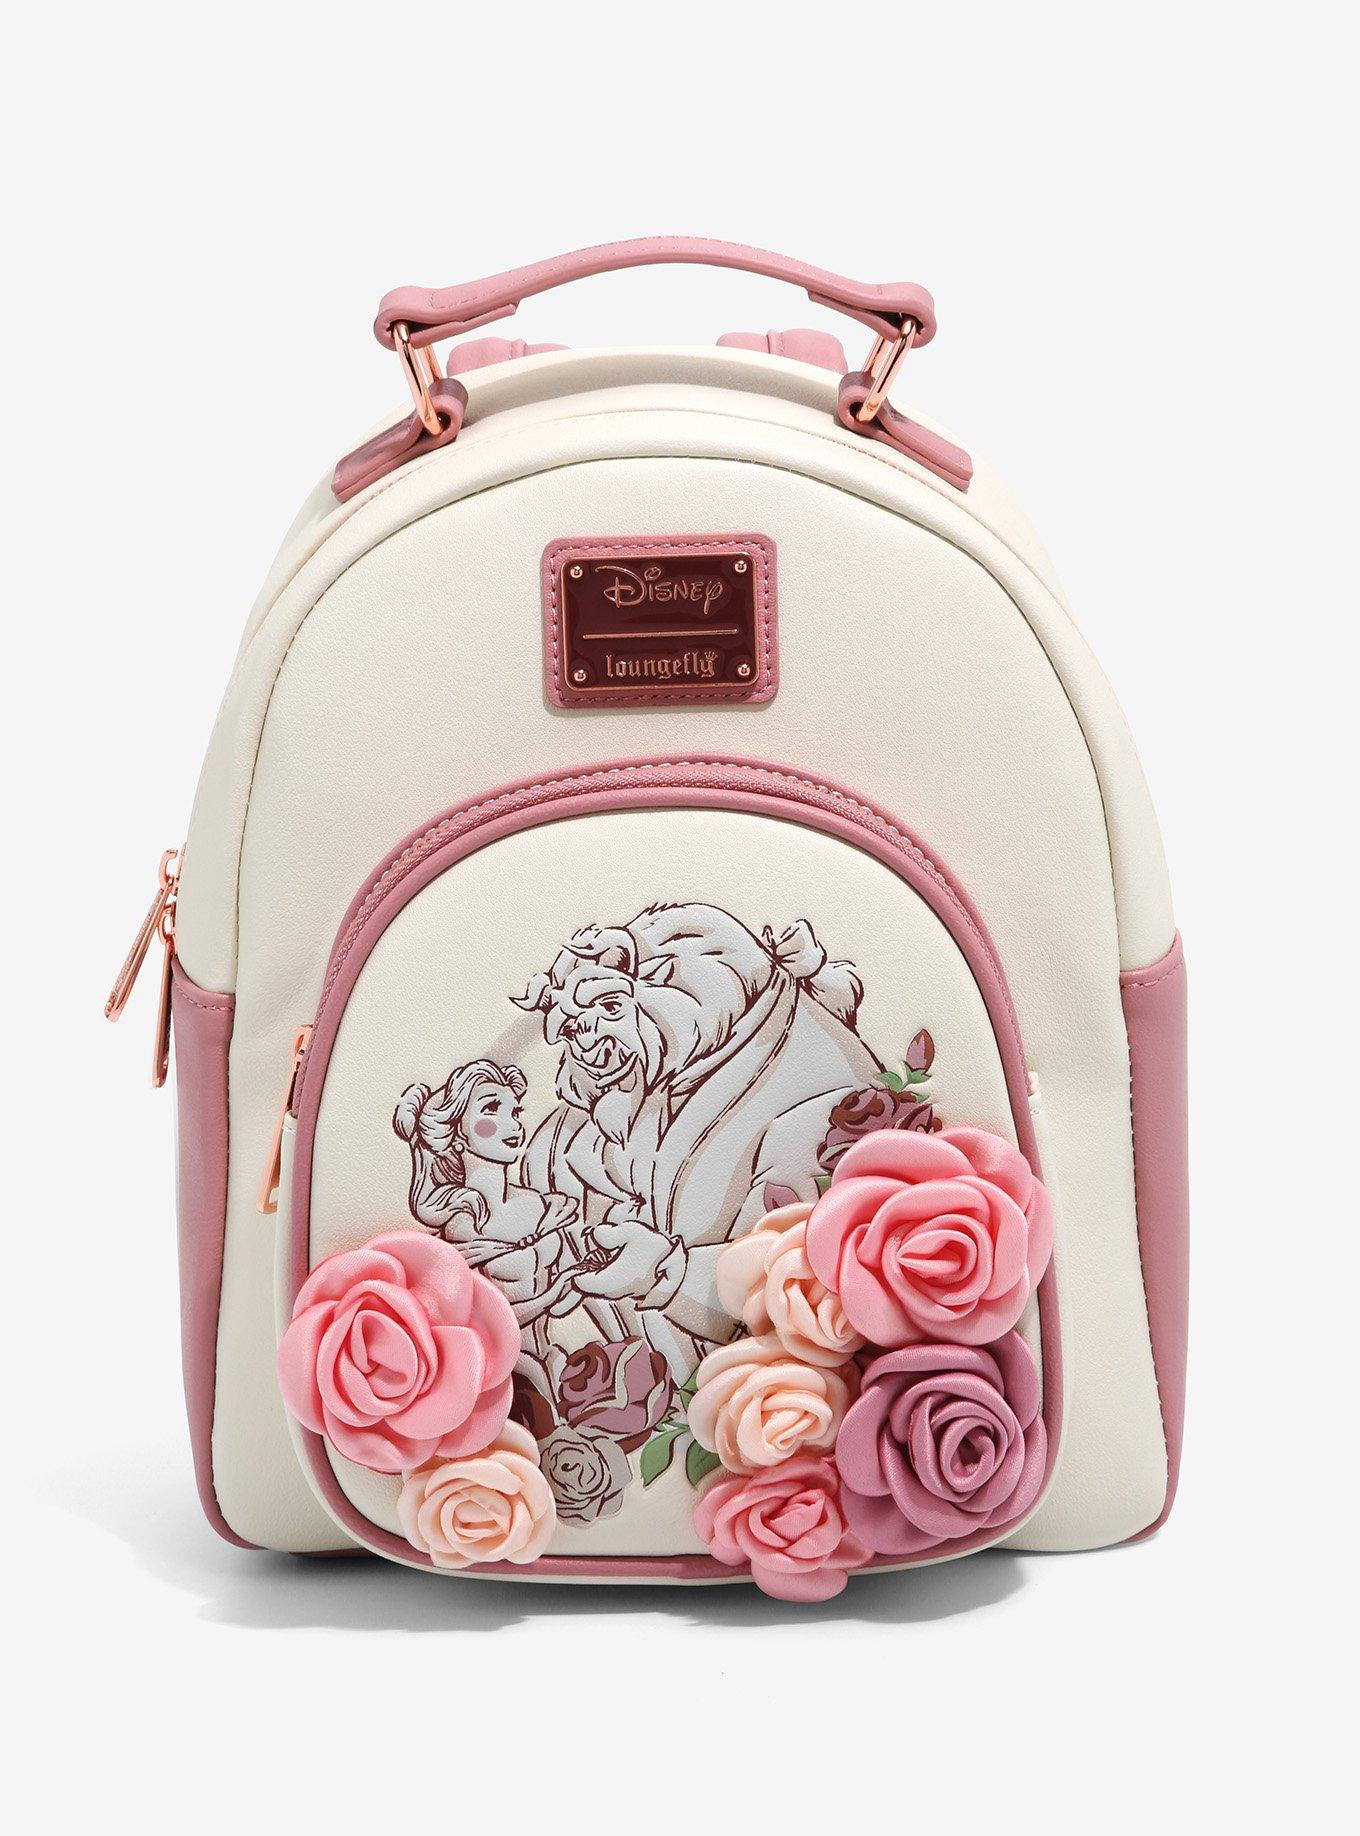 Buy Exclusive - Beauty and the Beast Chip Bubbles Mini Backpack at Loungefly .